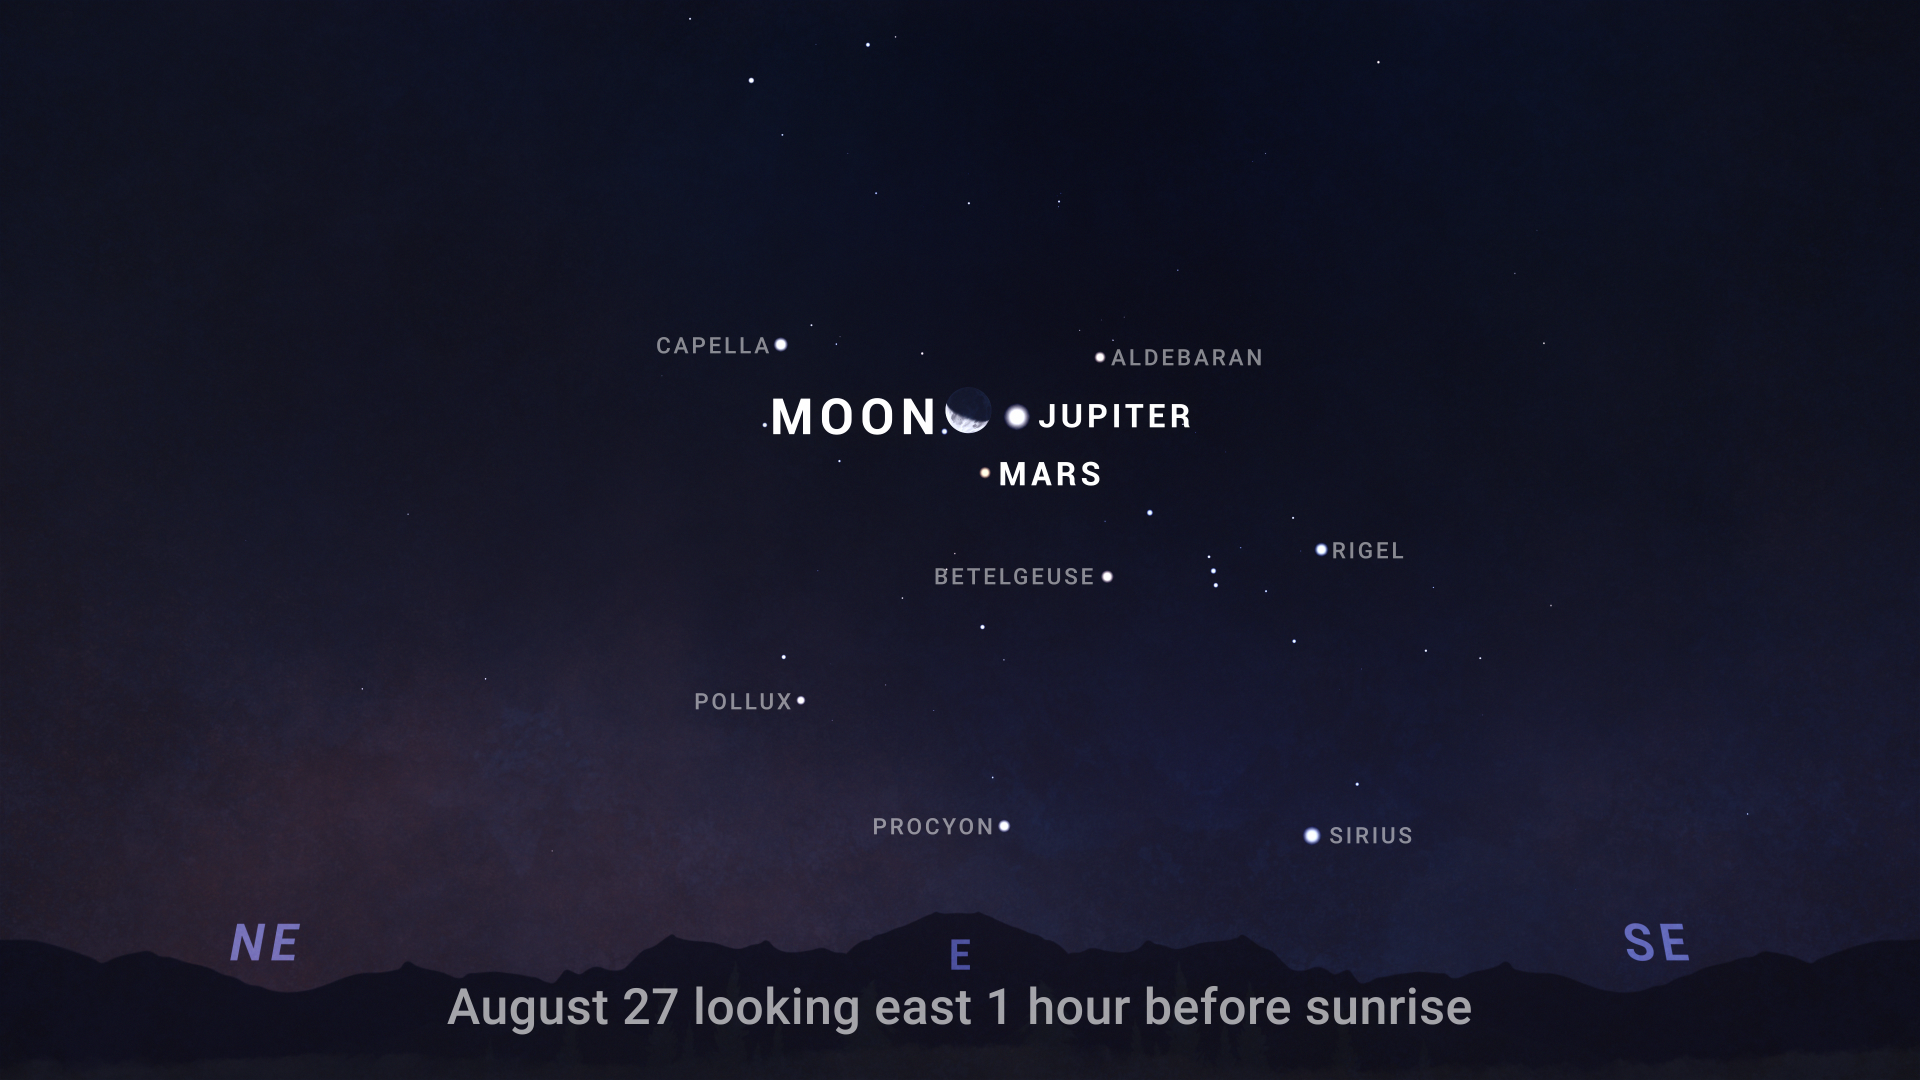 An illustrated sky chart shows the morning sky facing eastward, 1 hour before sunrise on August 17, 2024. The crescent Moon is at center, surrounded by several bright stars and planets. Jupiter and Mars are pictured as small white dots, with Jupiter immediately to the right of the Moon. Mars is directly below the Moon. Jupiter appears larger than Mars, indicating its greater brightness.